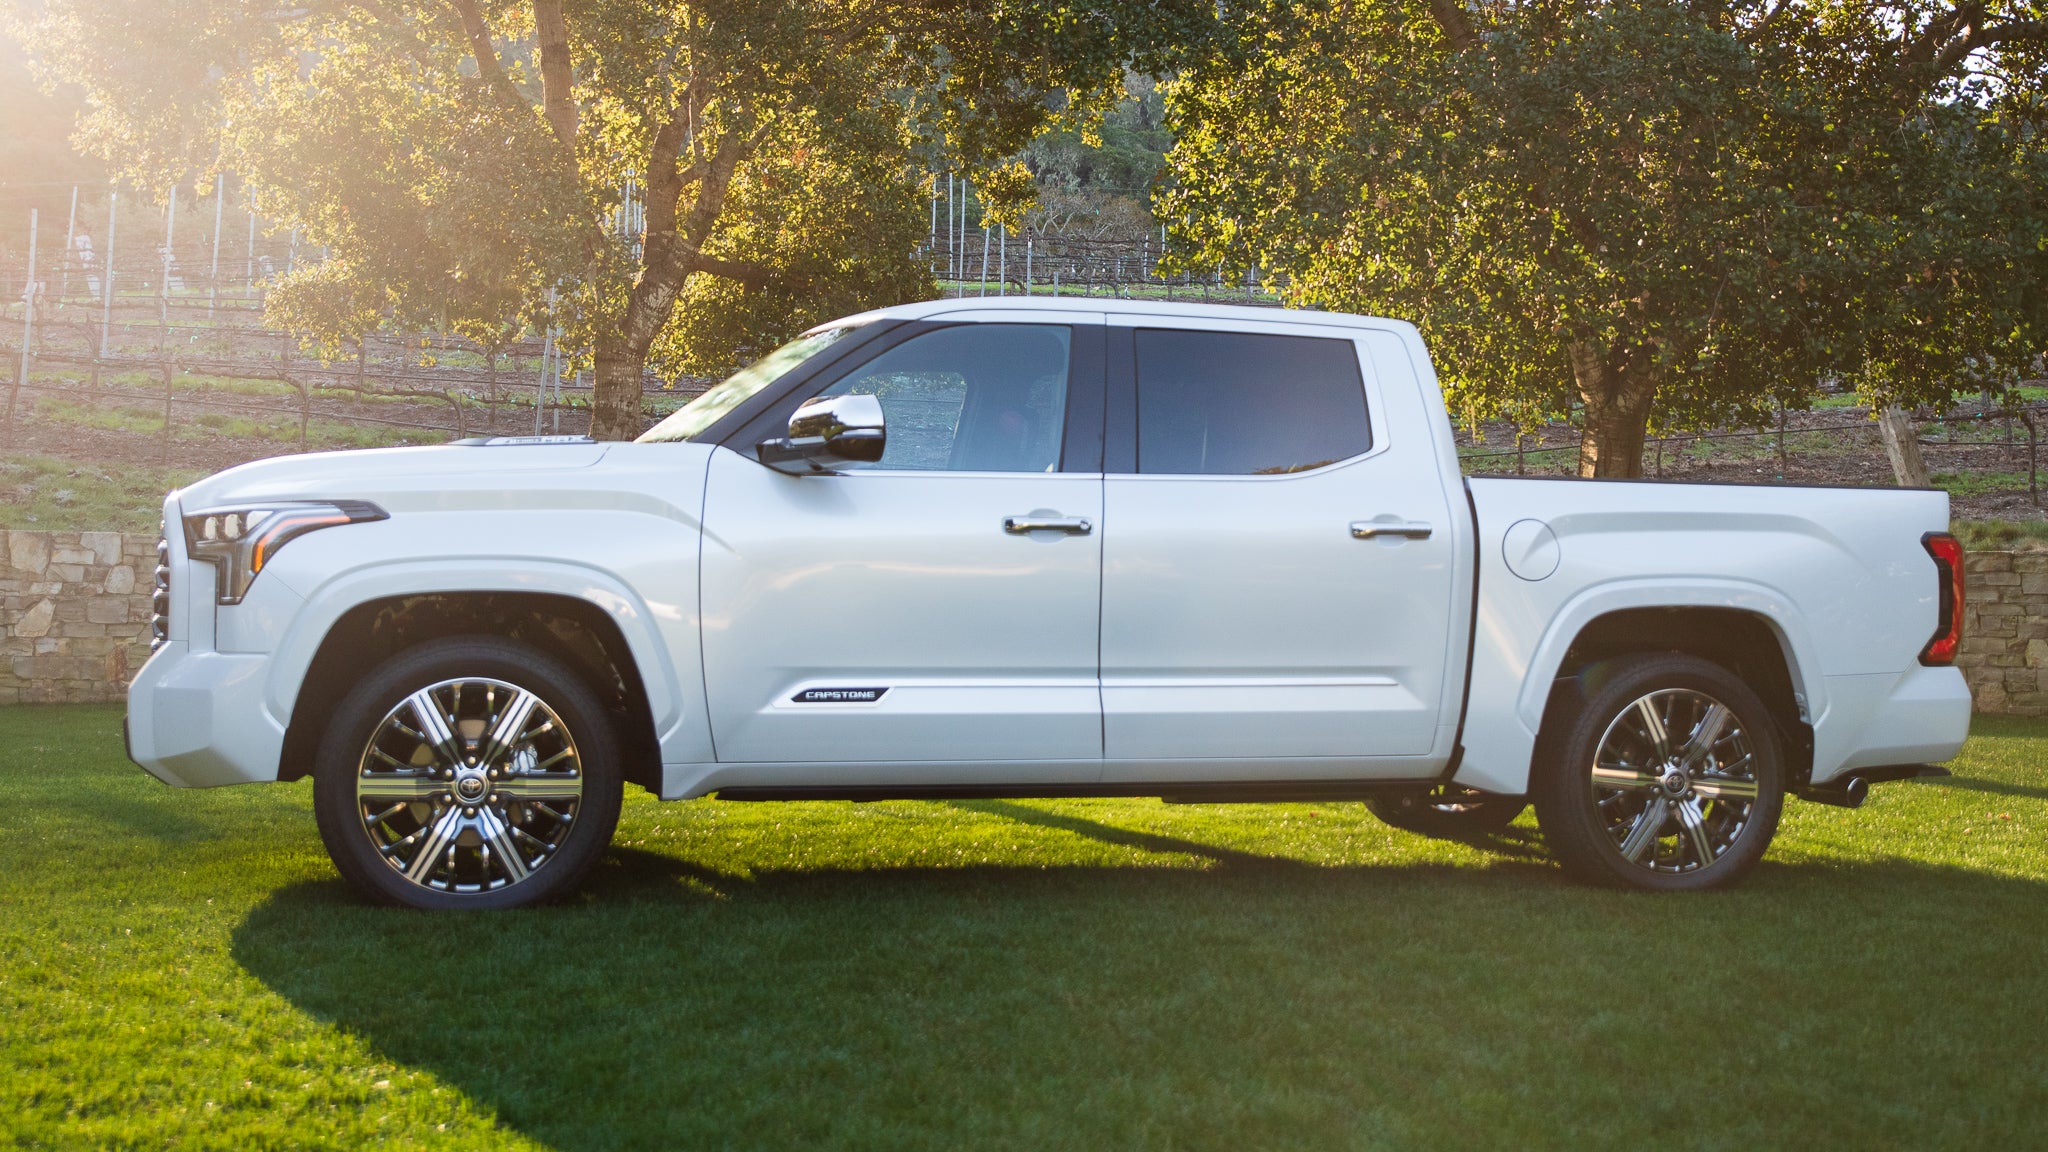 Treat Your Truck for Christmas: The Drive Holiday Gift Guide